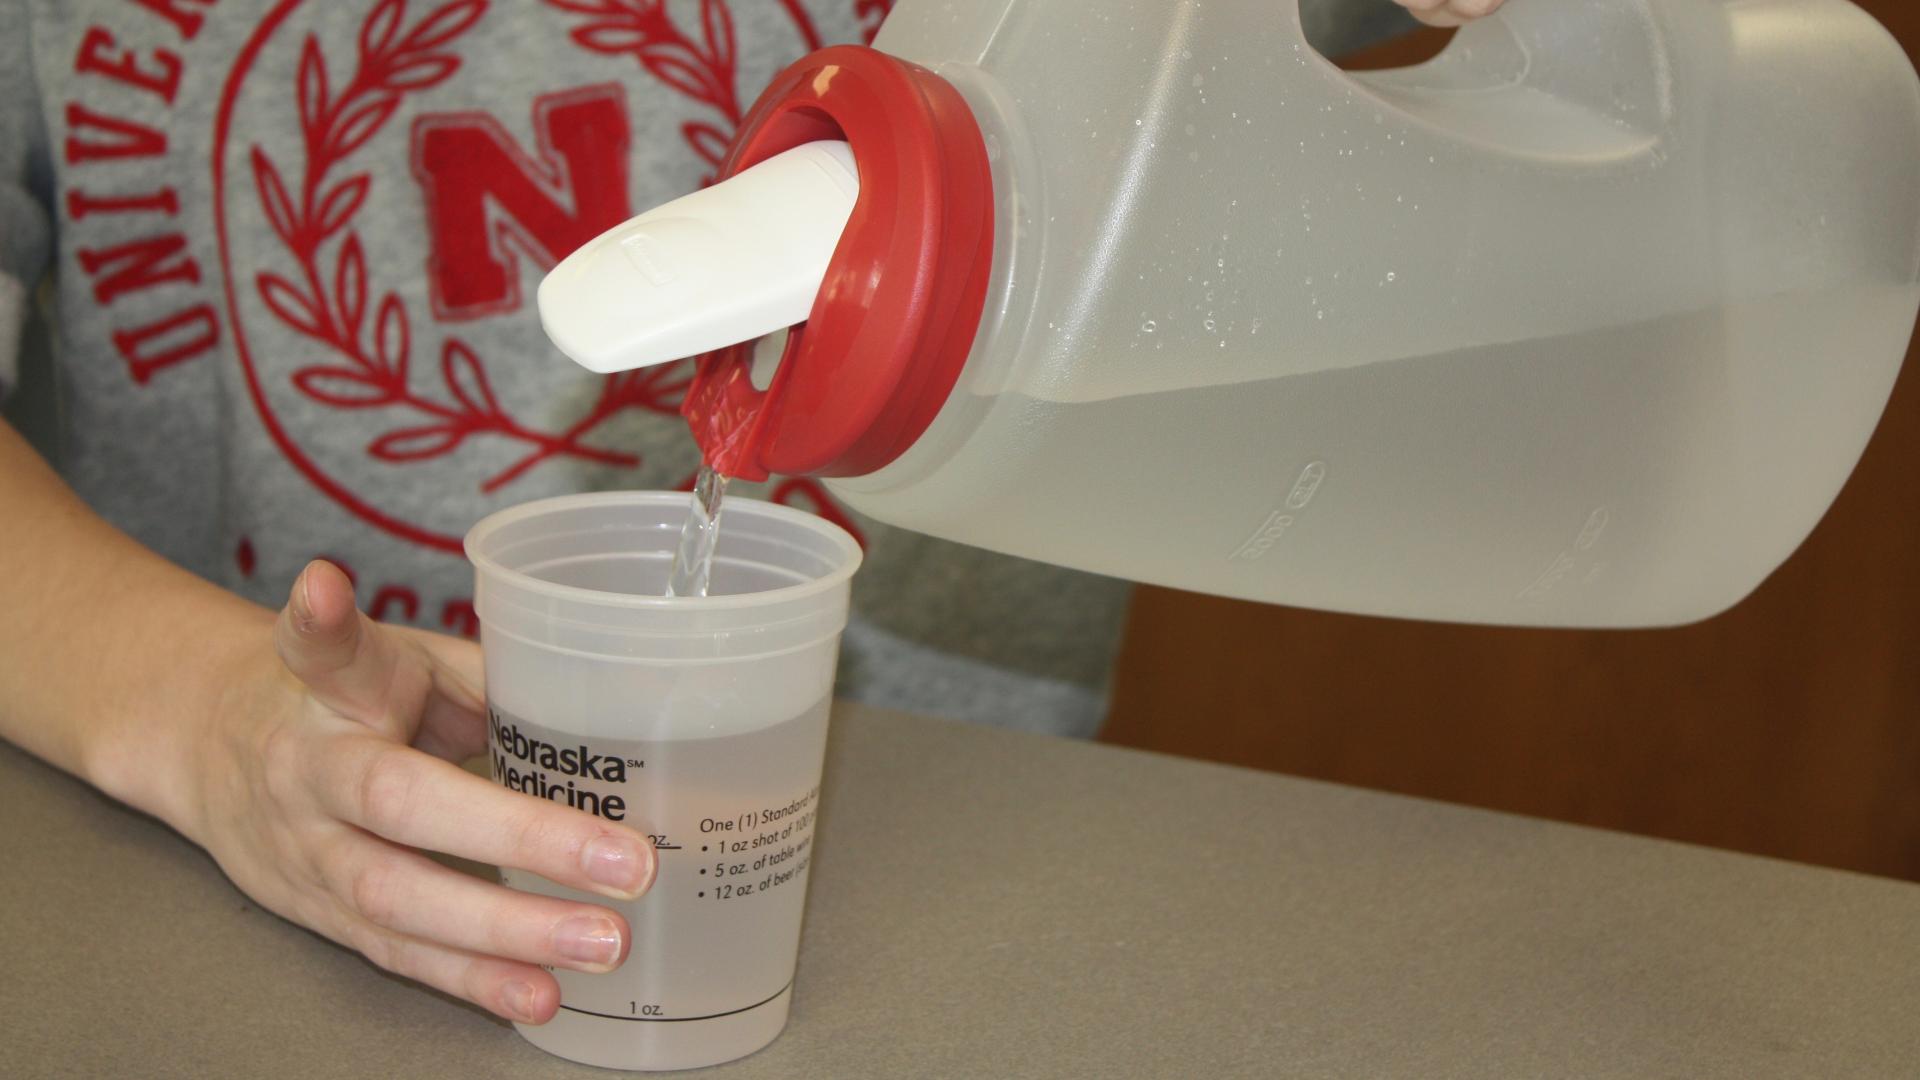 Student pours water into a cup with ounce markings to determine how much is in a standard alcoholic beverage.